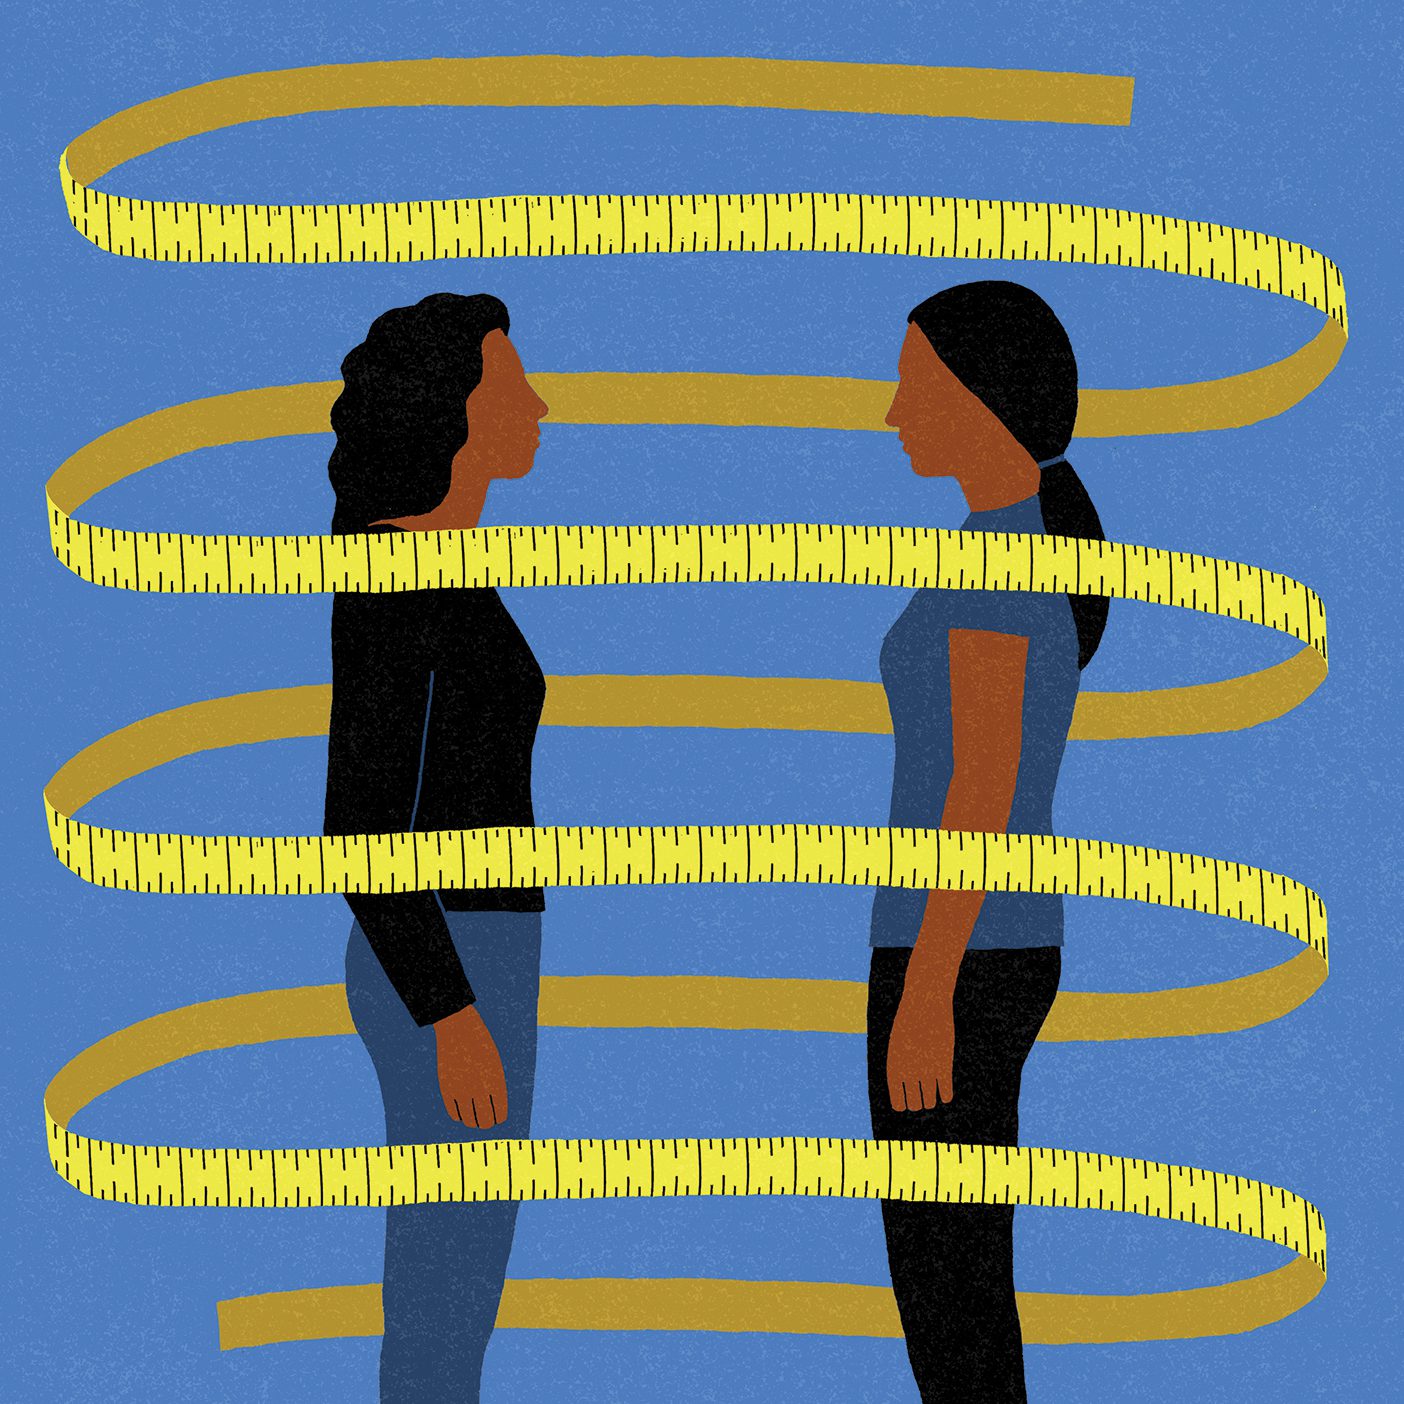 An illustration of two women looking at each other with a long tape measure circled around them in loops.